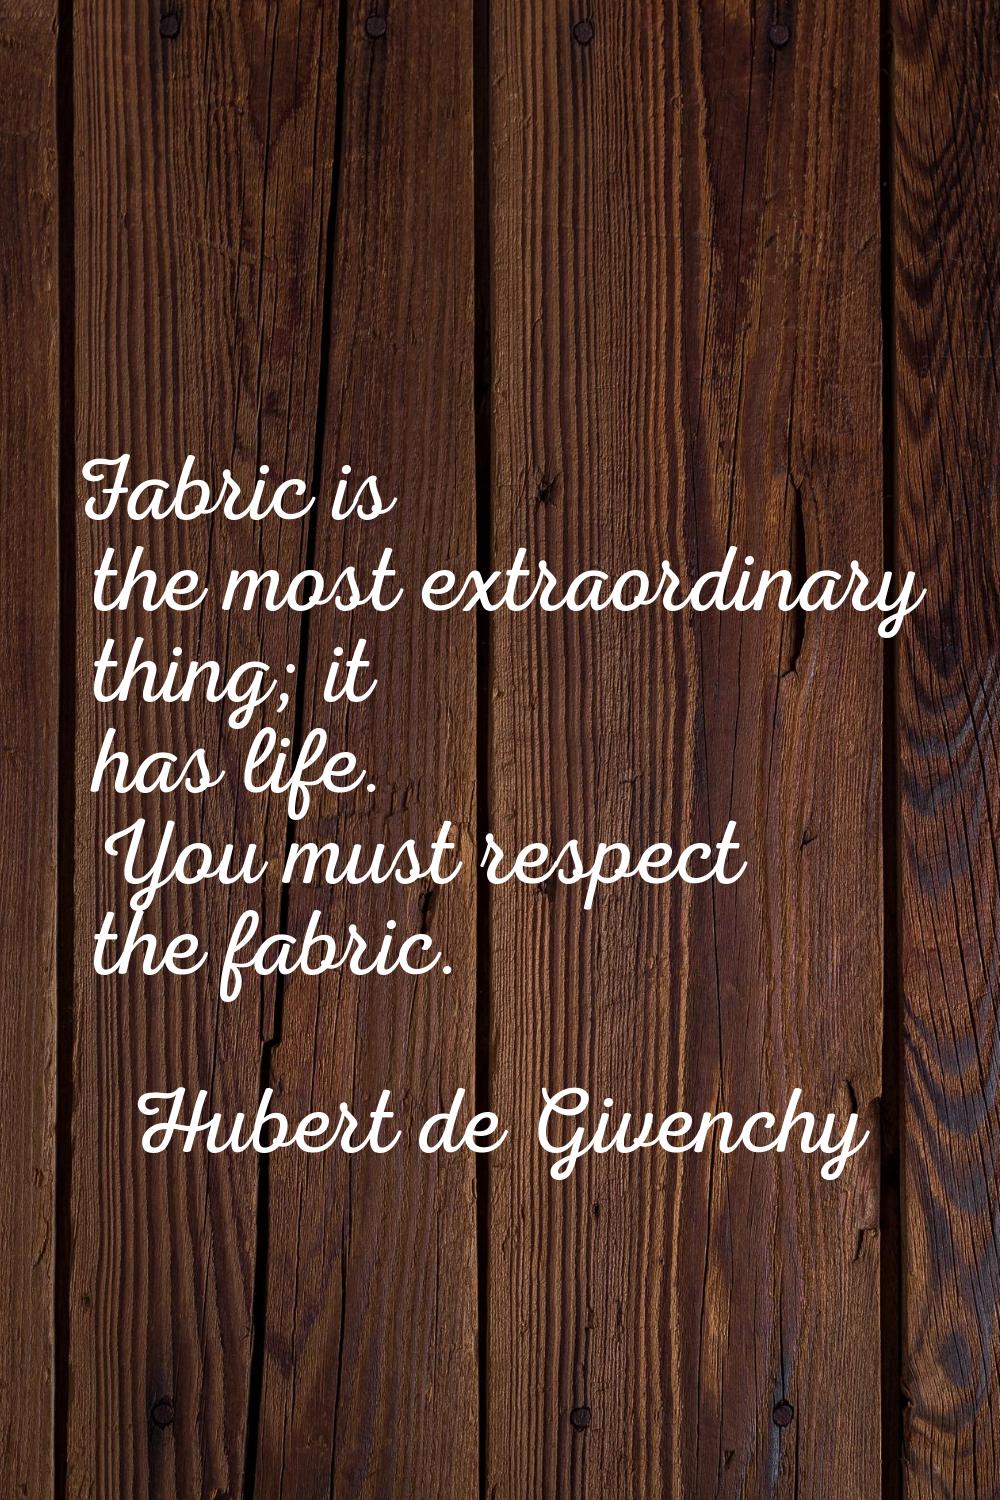 Fabric is the most extraordinary thing; it has life. You must respect the fabric.